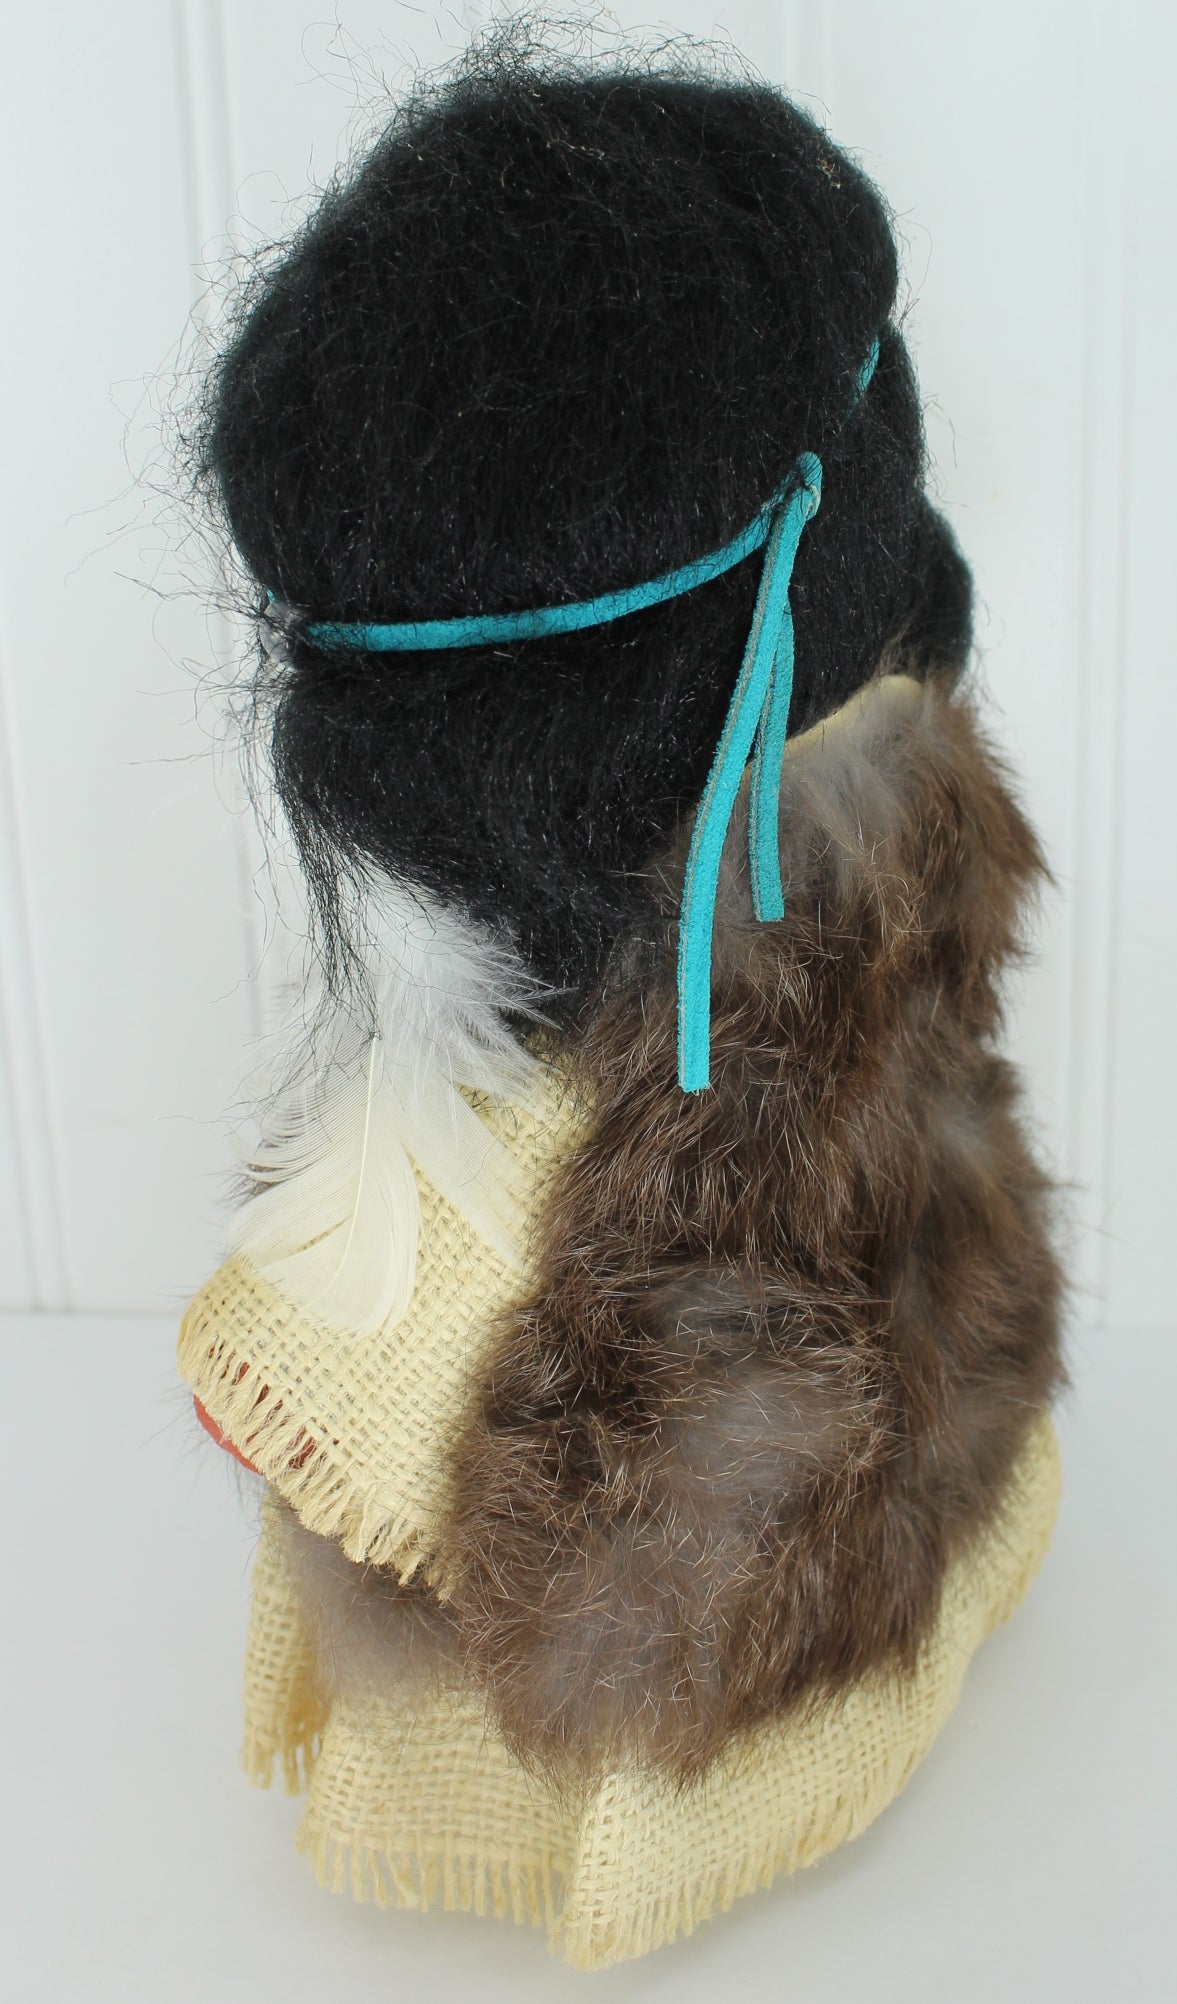 Vintage Lil Luv Native American Doll with Baby 10" Painted Faces Fur Feathers Beads very well crafted doll